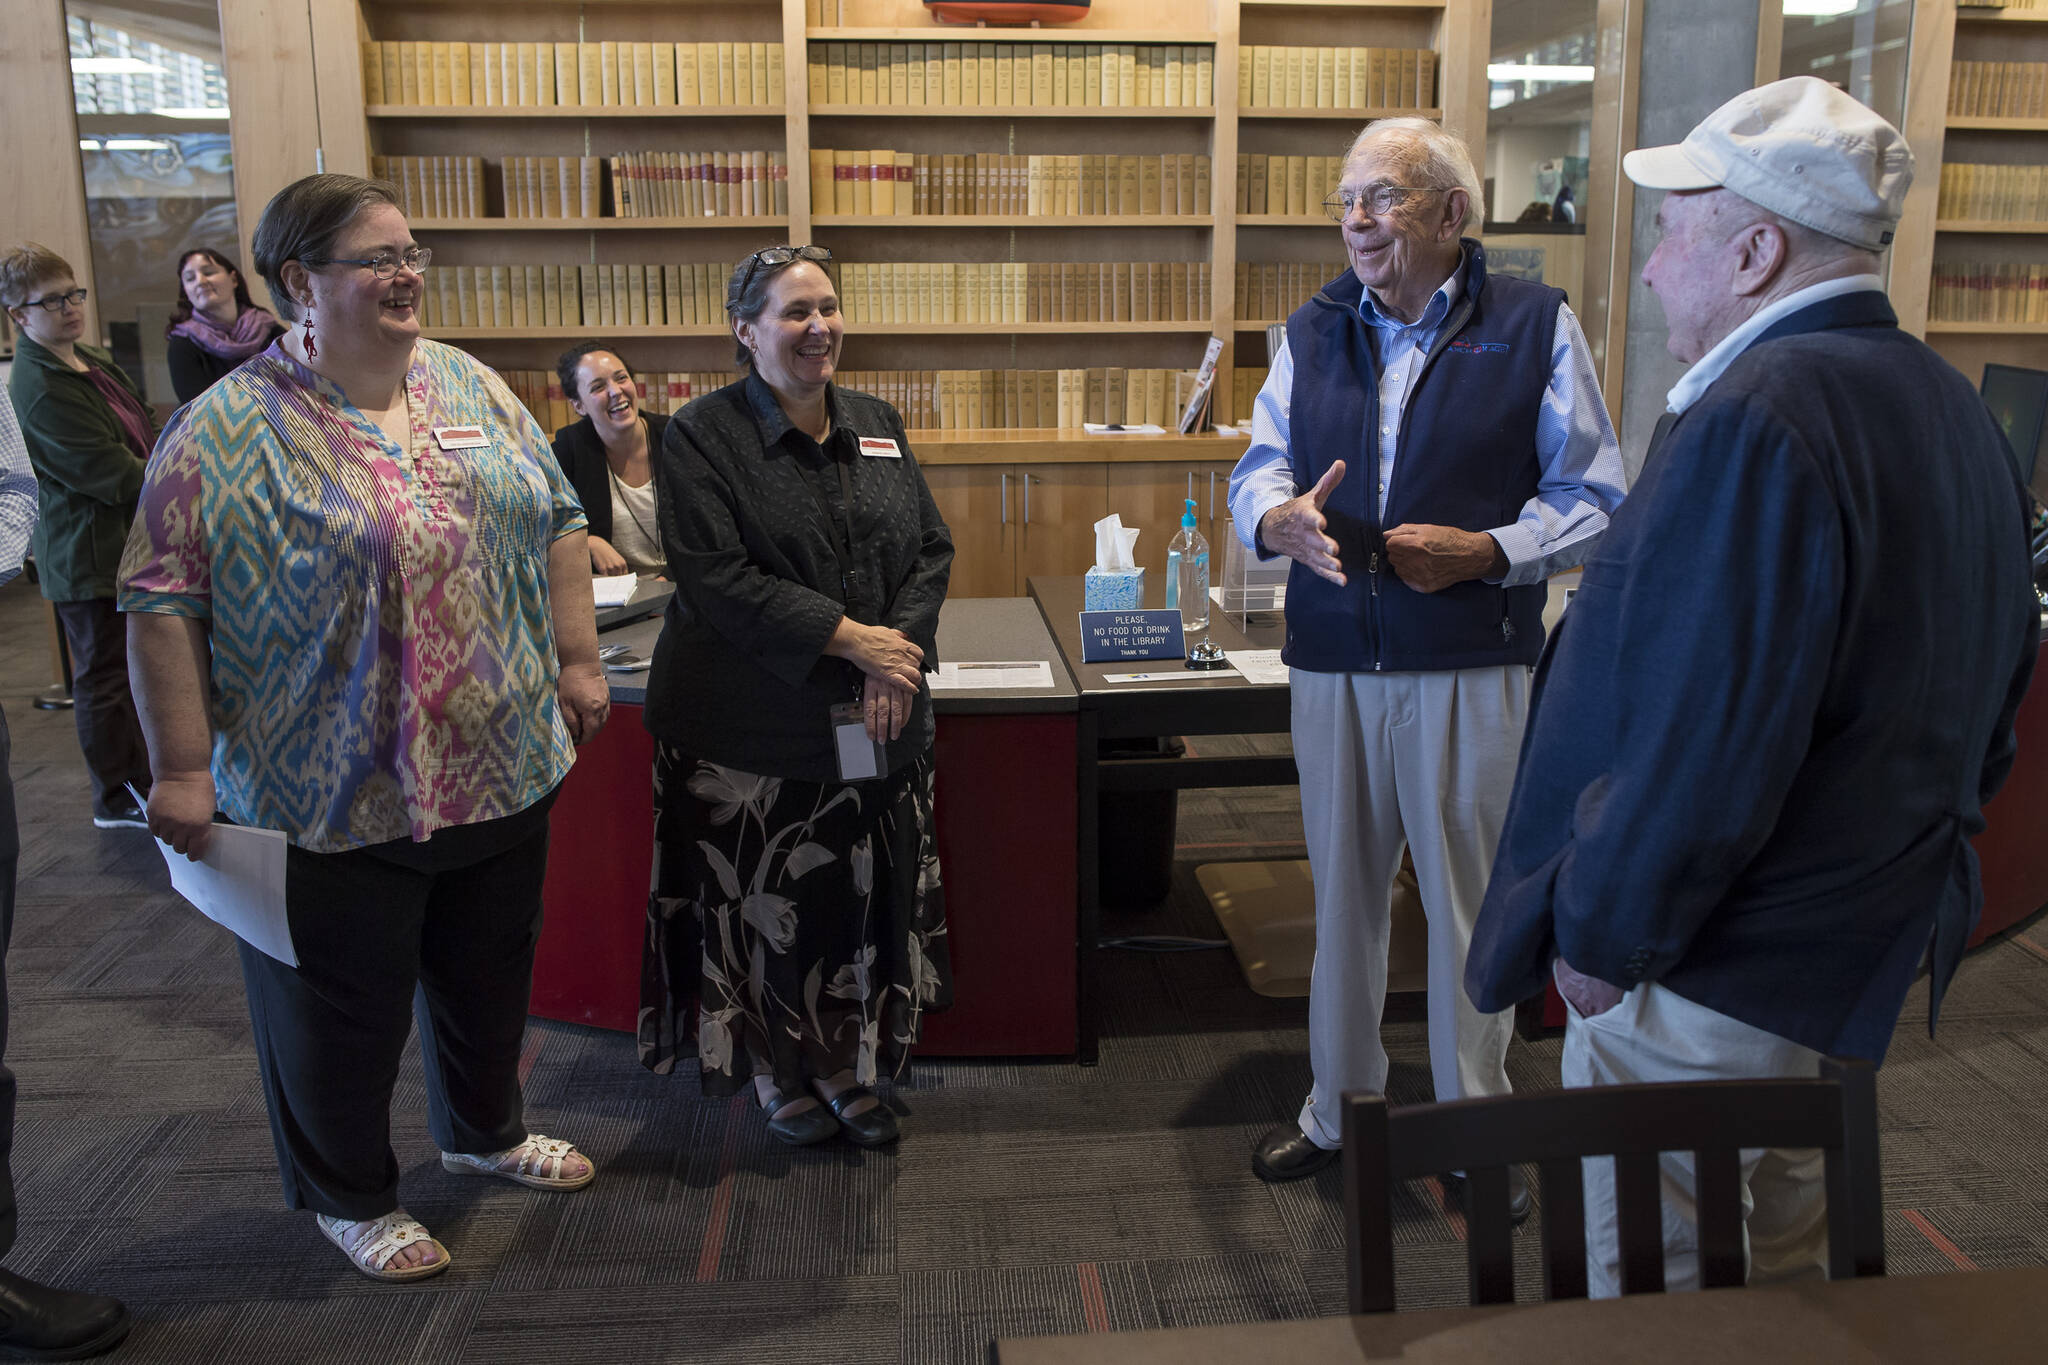 The fifth Governor of Alaska, Bill Sheffield, second from right, speaks to Alaska State Archives staff during a visit to present a copy of his book, “Bill Sheffield: A Memoir, From the Great Depression to the Governor’s Mansion and Beyond” at the Father Andrew P. Kashevaroff Building in September 2018. Admiral Richard Knapp, right, who was Commissioner of Transportation during Gov. Sheffield’s administration, also attended the event. Sheffield died Friday at age 94. (Michael Penn / Juneau Empire File)